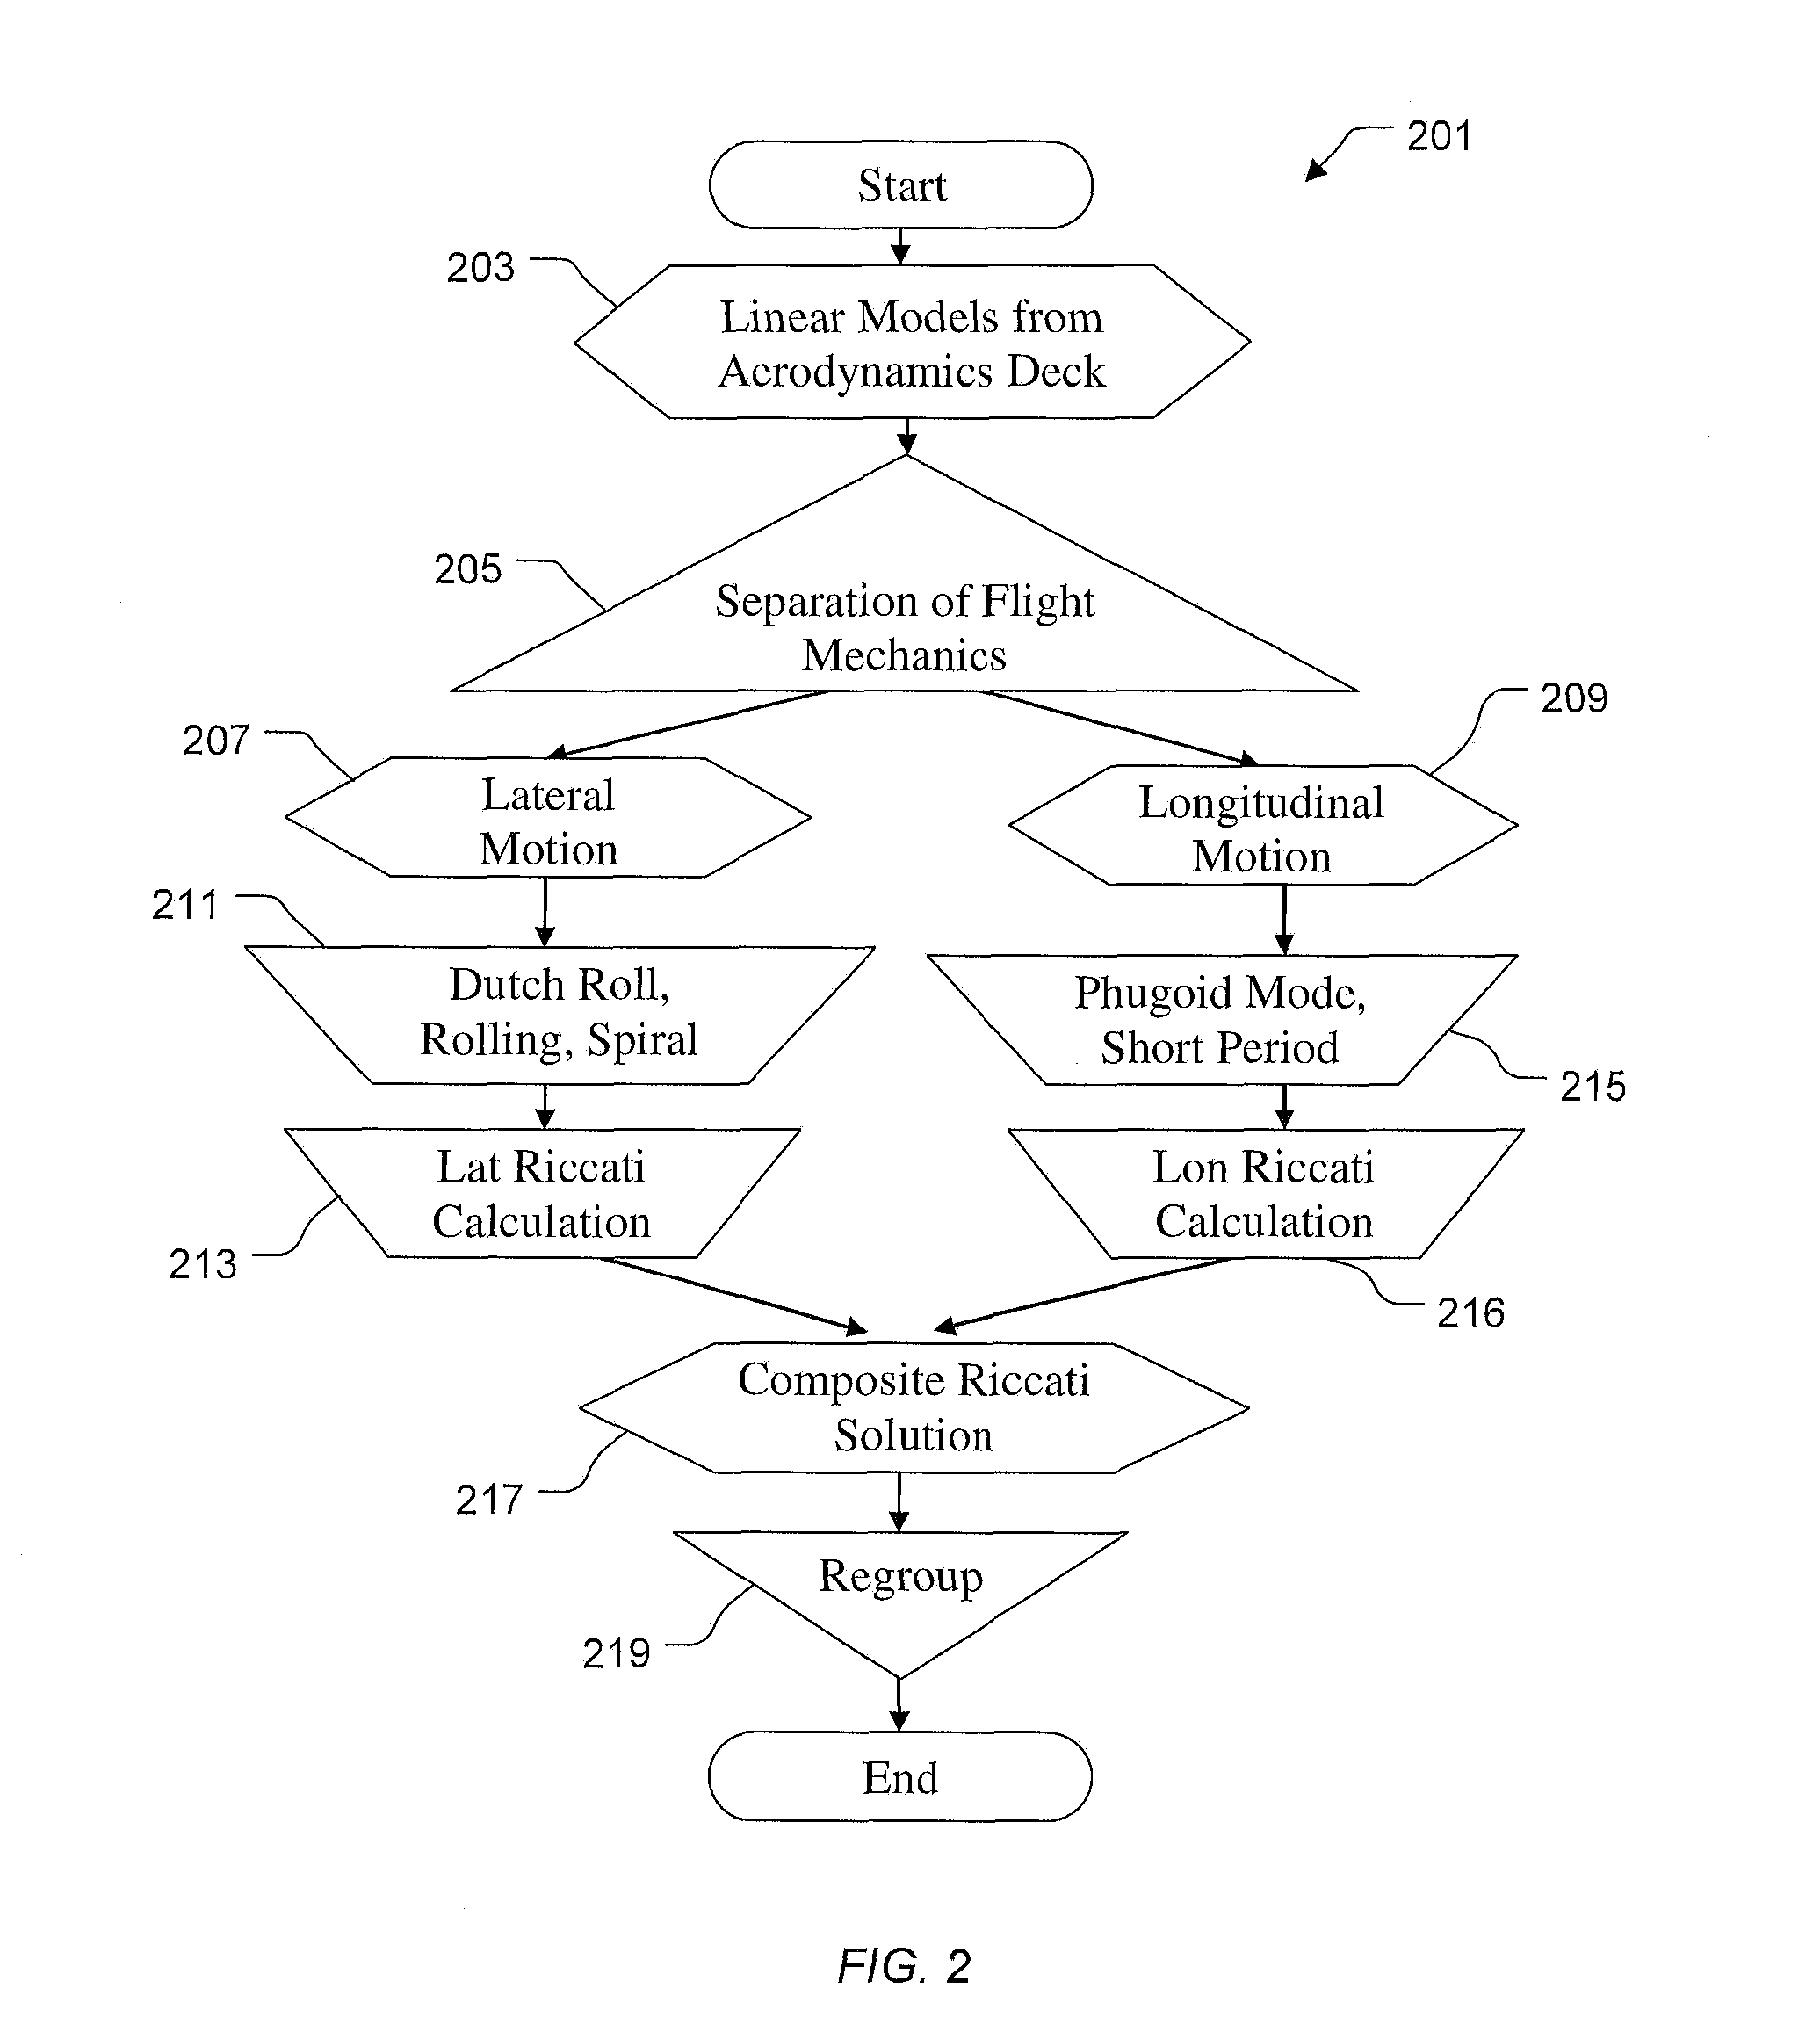 Extension of three loop control laws for system uncertainties, calculation time delay and command quickness